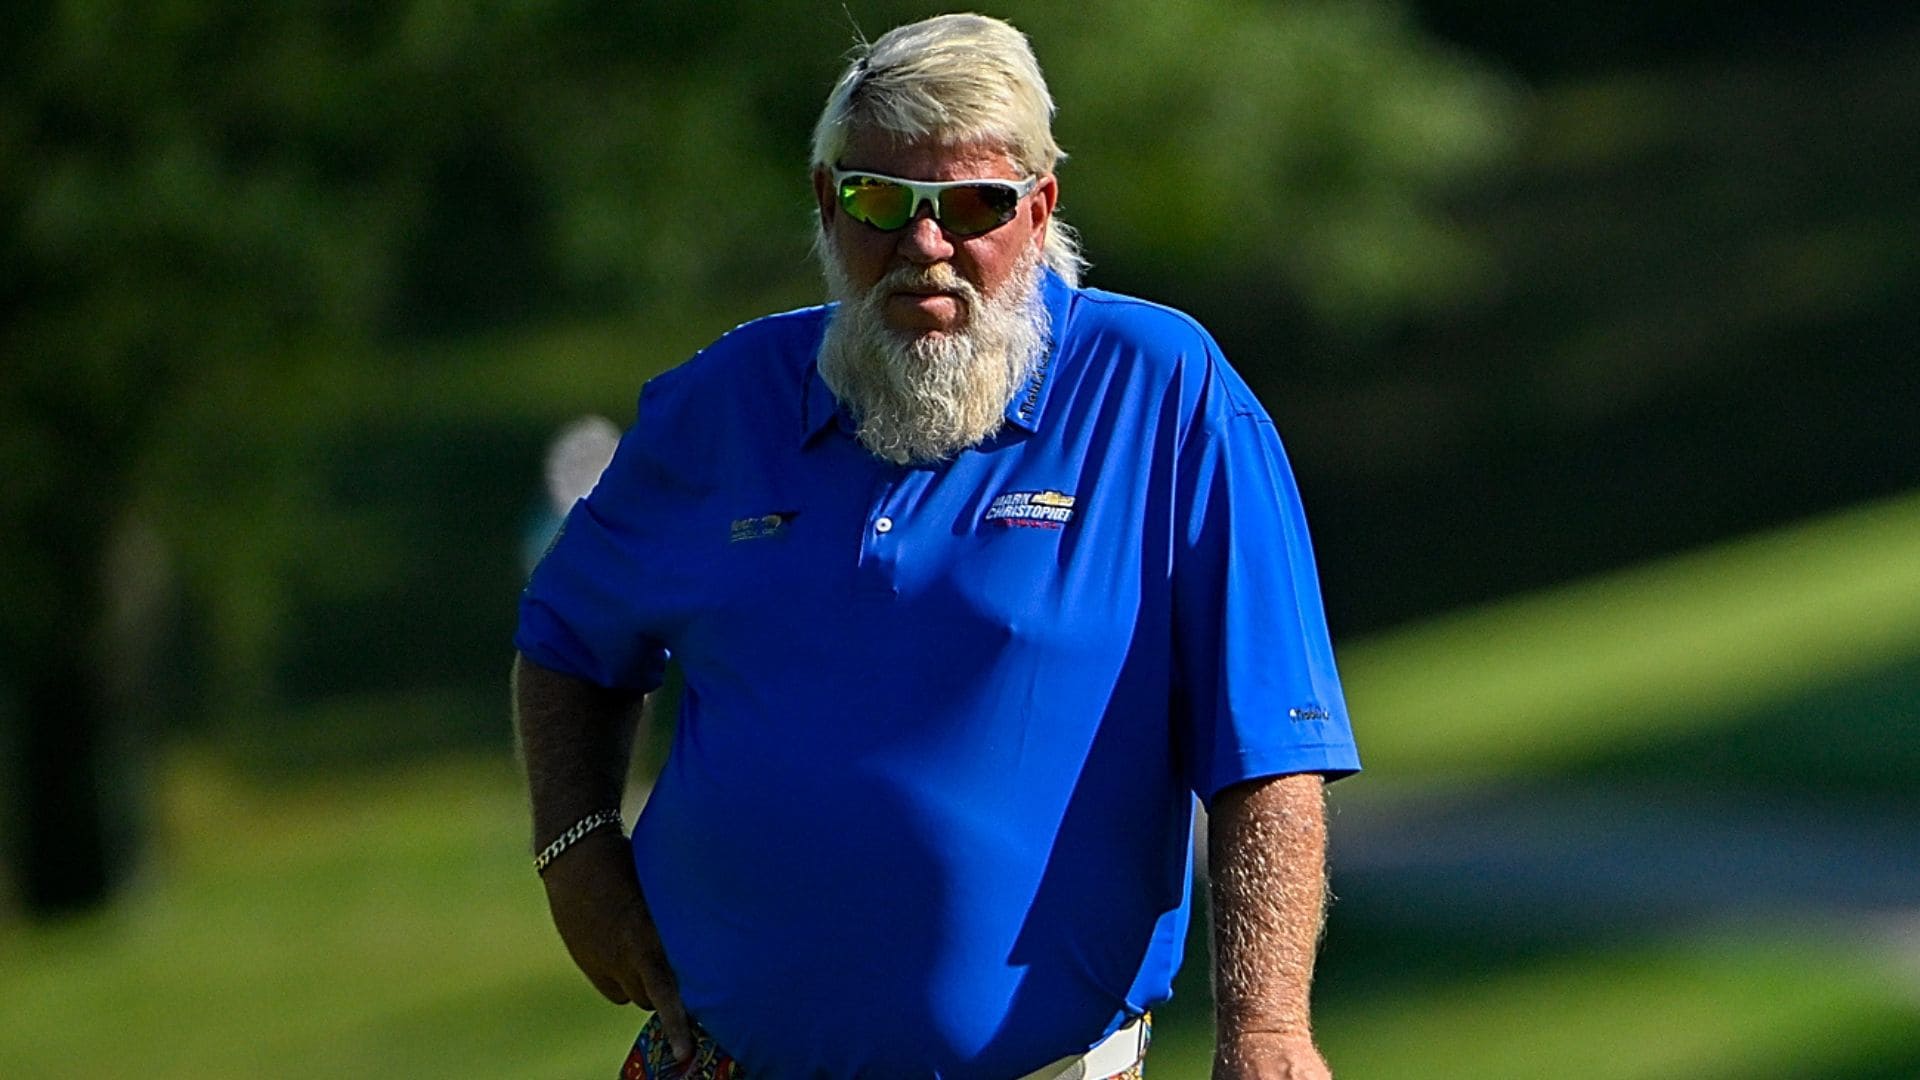 Despite feeling ‘like somebody kicked me in the nuts,’ John Daly two off Ascension Charity Classic lead